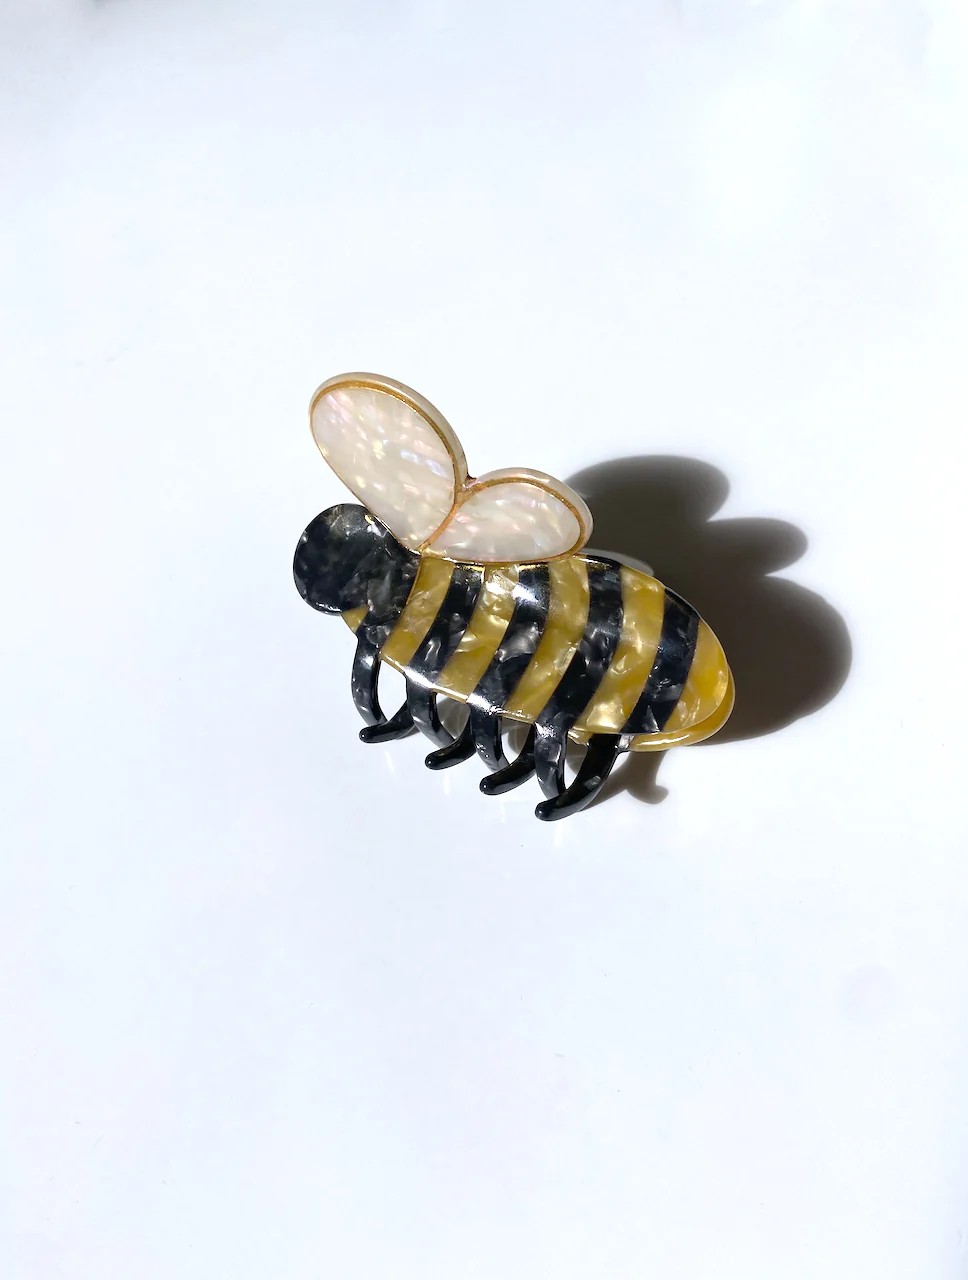 HAIR CLIP WITH A YELLOW AND BLACK STRIPED BODY, AND AN OFFWHITE HEART SHAPE THAT IS MADE TO RESEMBLE A BUMBLE BEE. THE COLORFUL CLIP SITS ON TOP OF A WHITE BACKGROUND. 